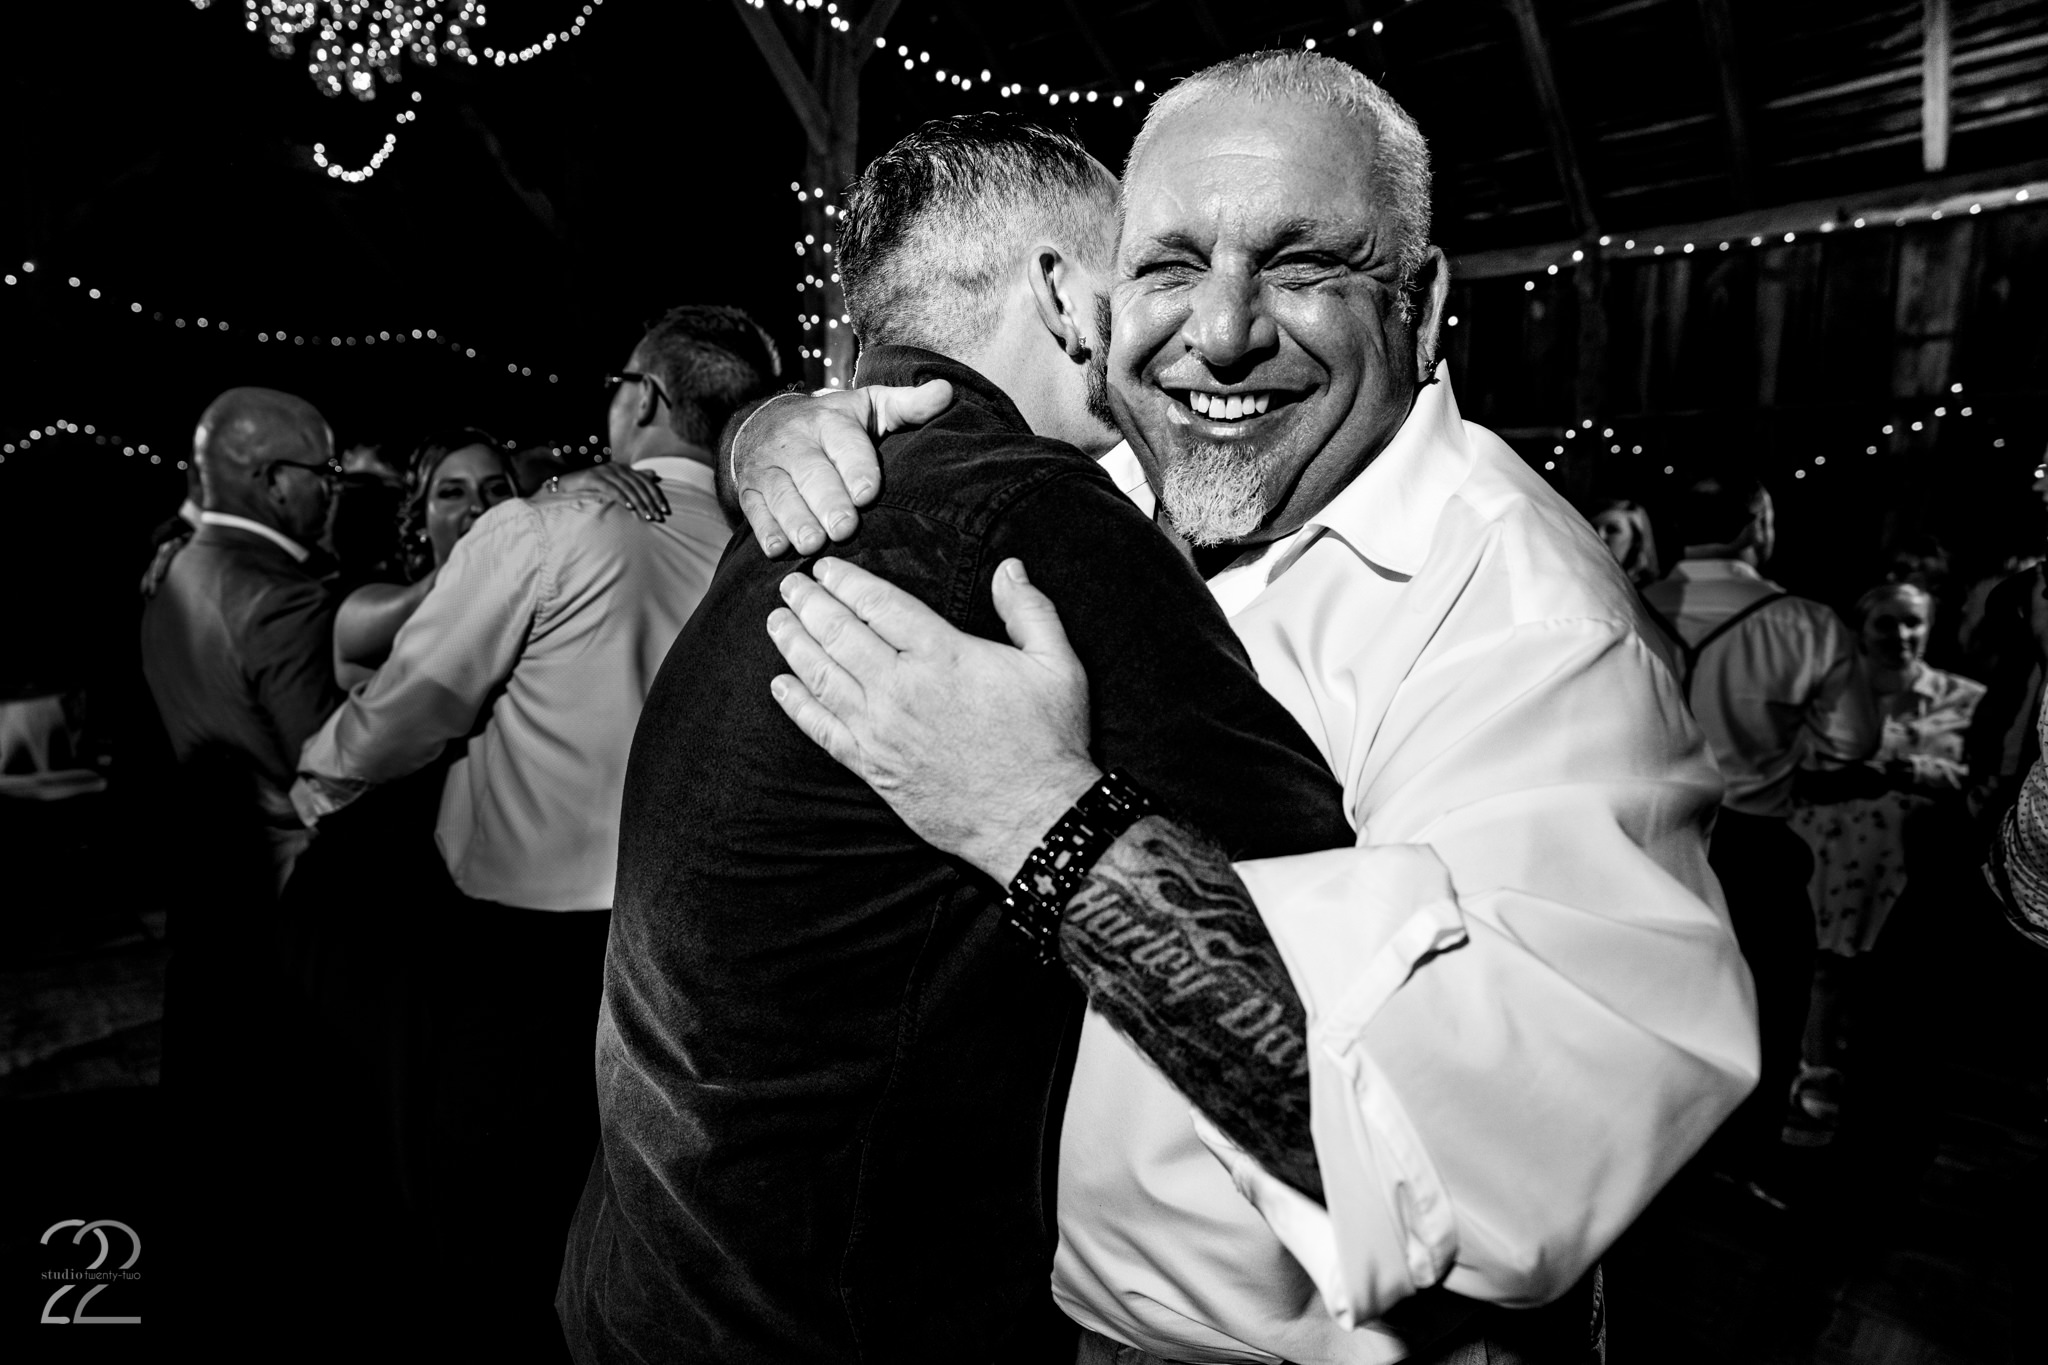  The core of what makes amazing weddings is the emotions shared by everyone. The love celebrated isn’t just between the couple, but all the guests as well. Megan Allen makes it her mission to show this in all her photographs. 